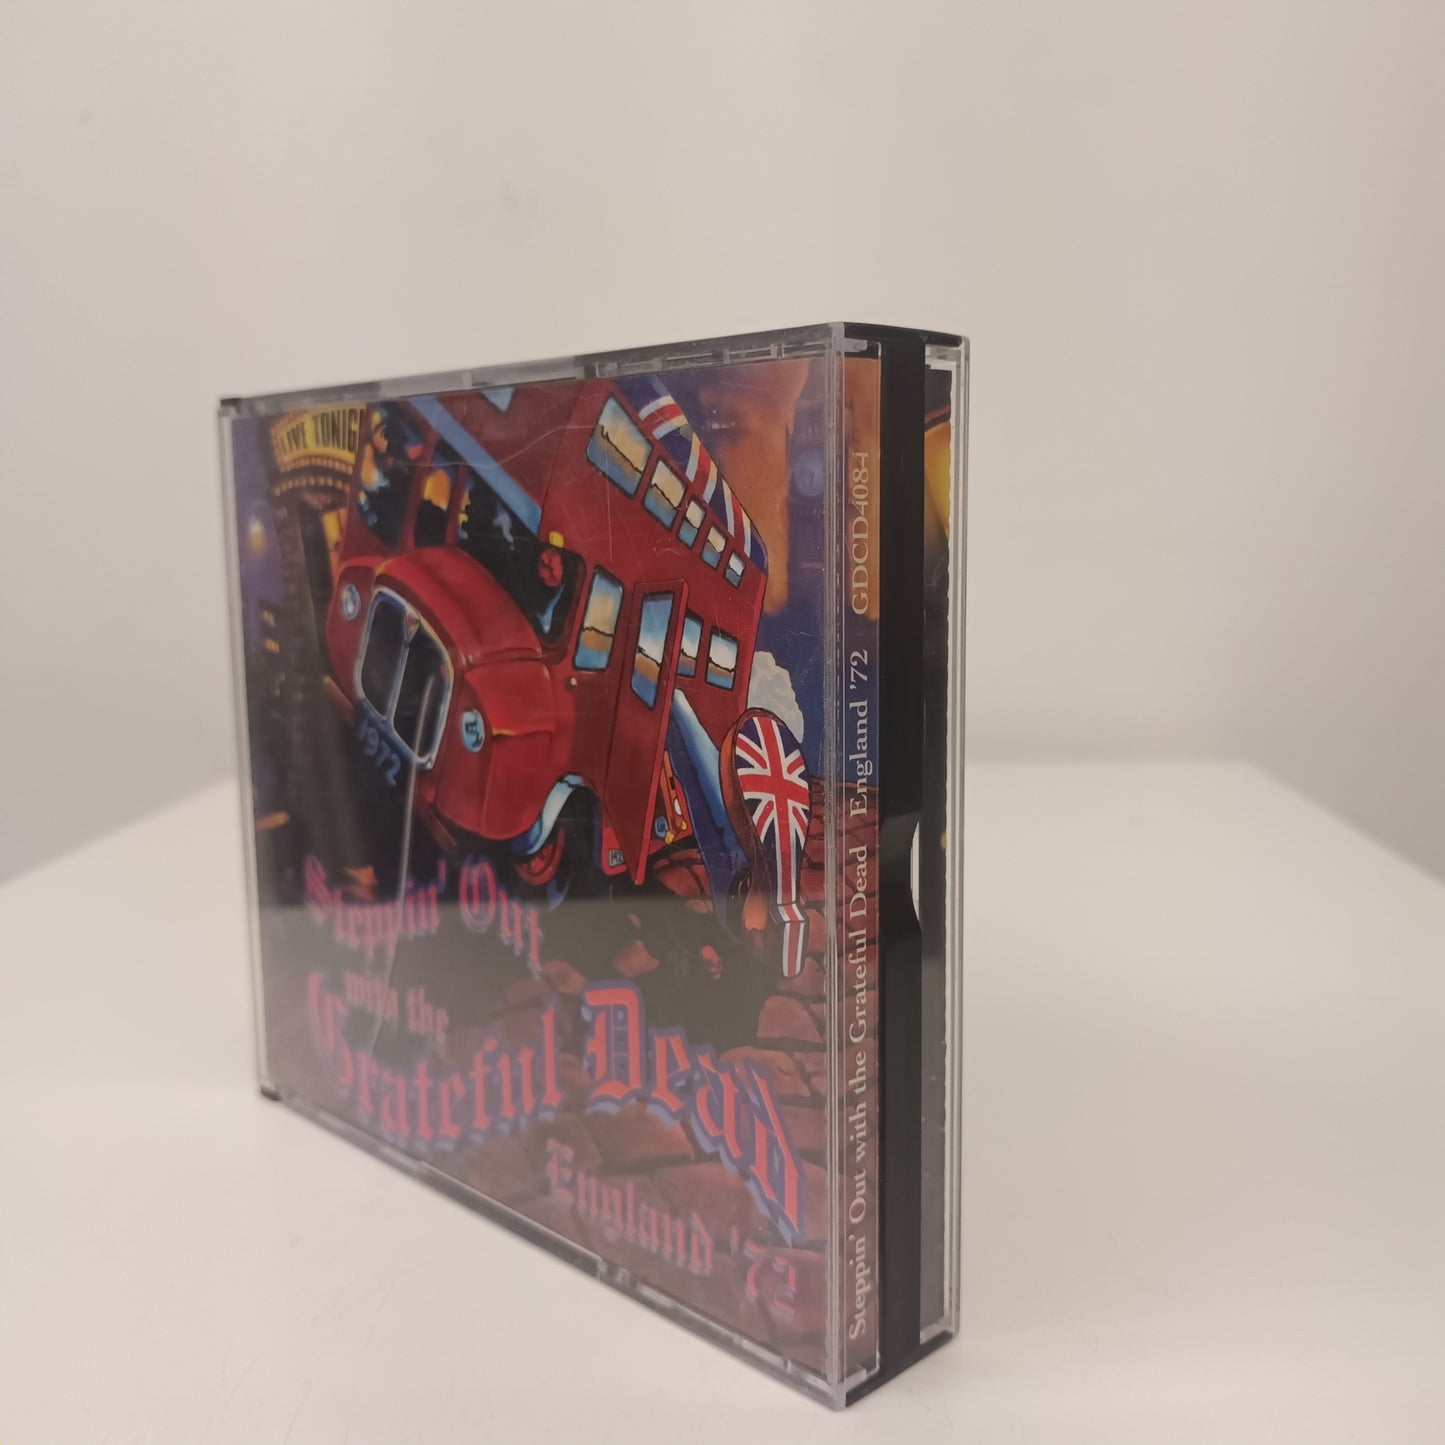 Steppin' Out With The Grateful Dead England '72 4 CD Box Set